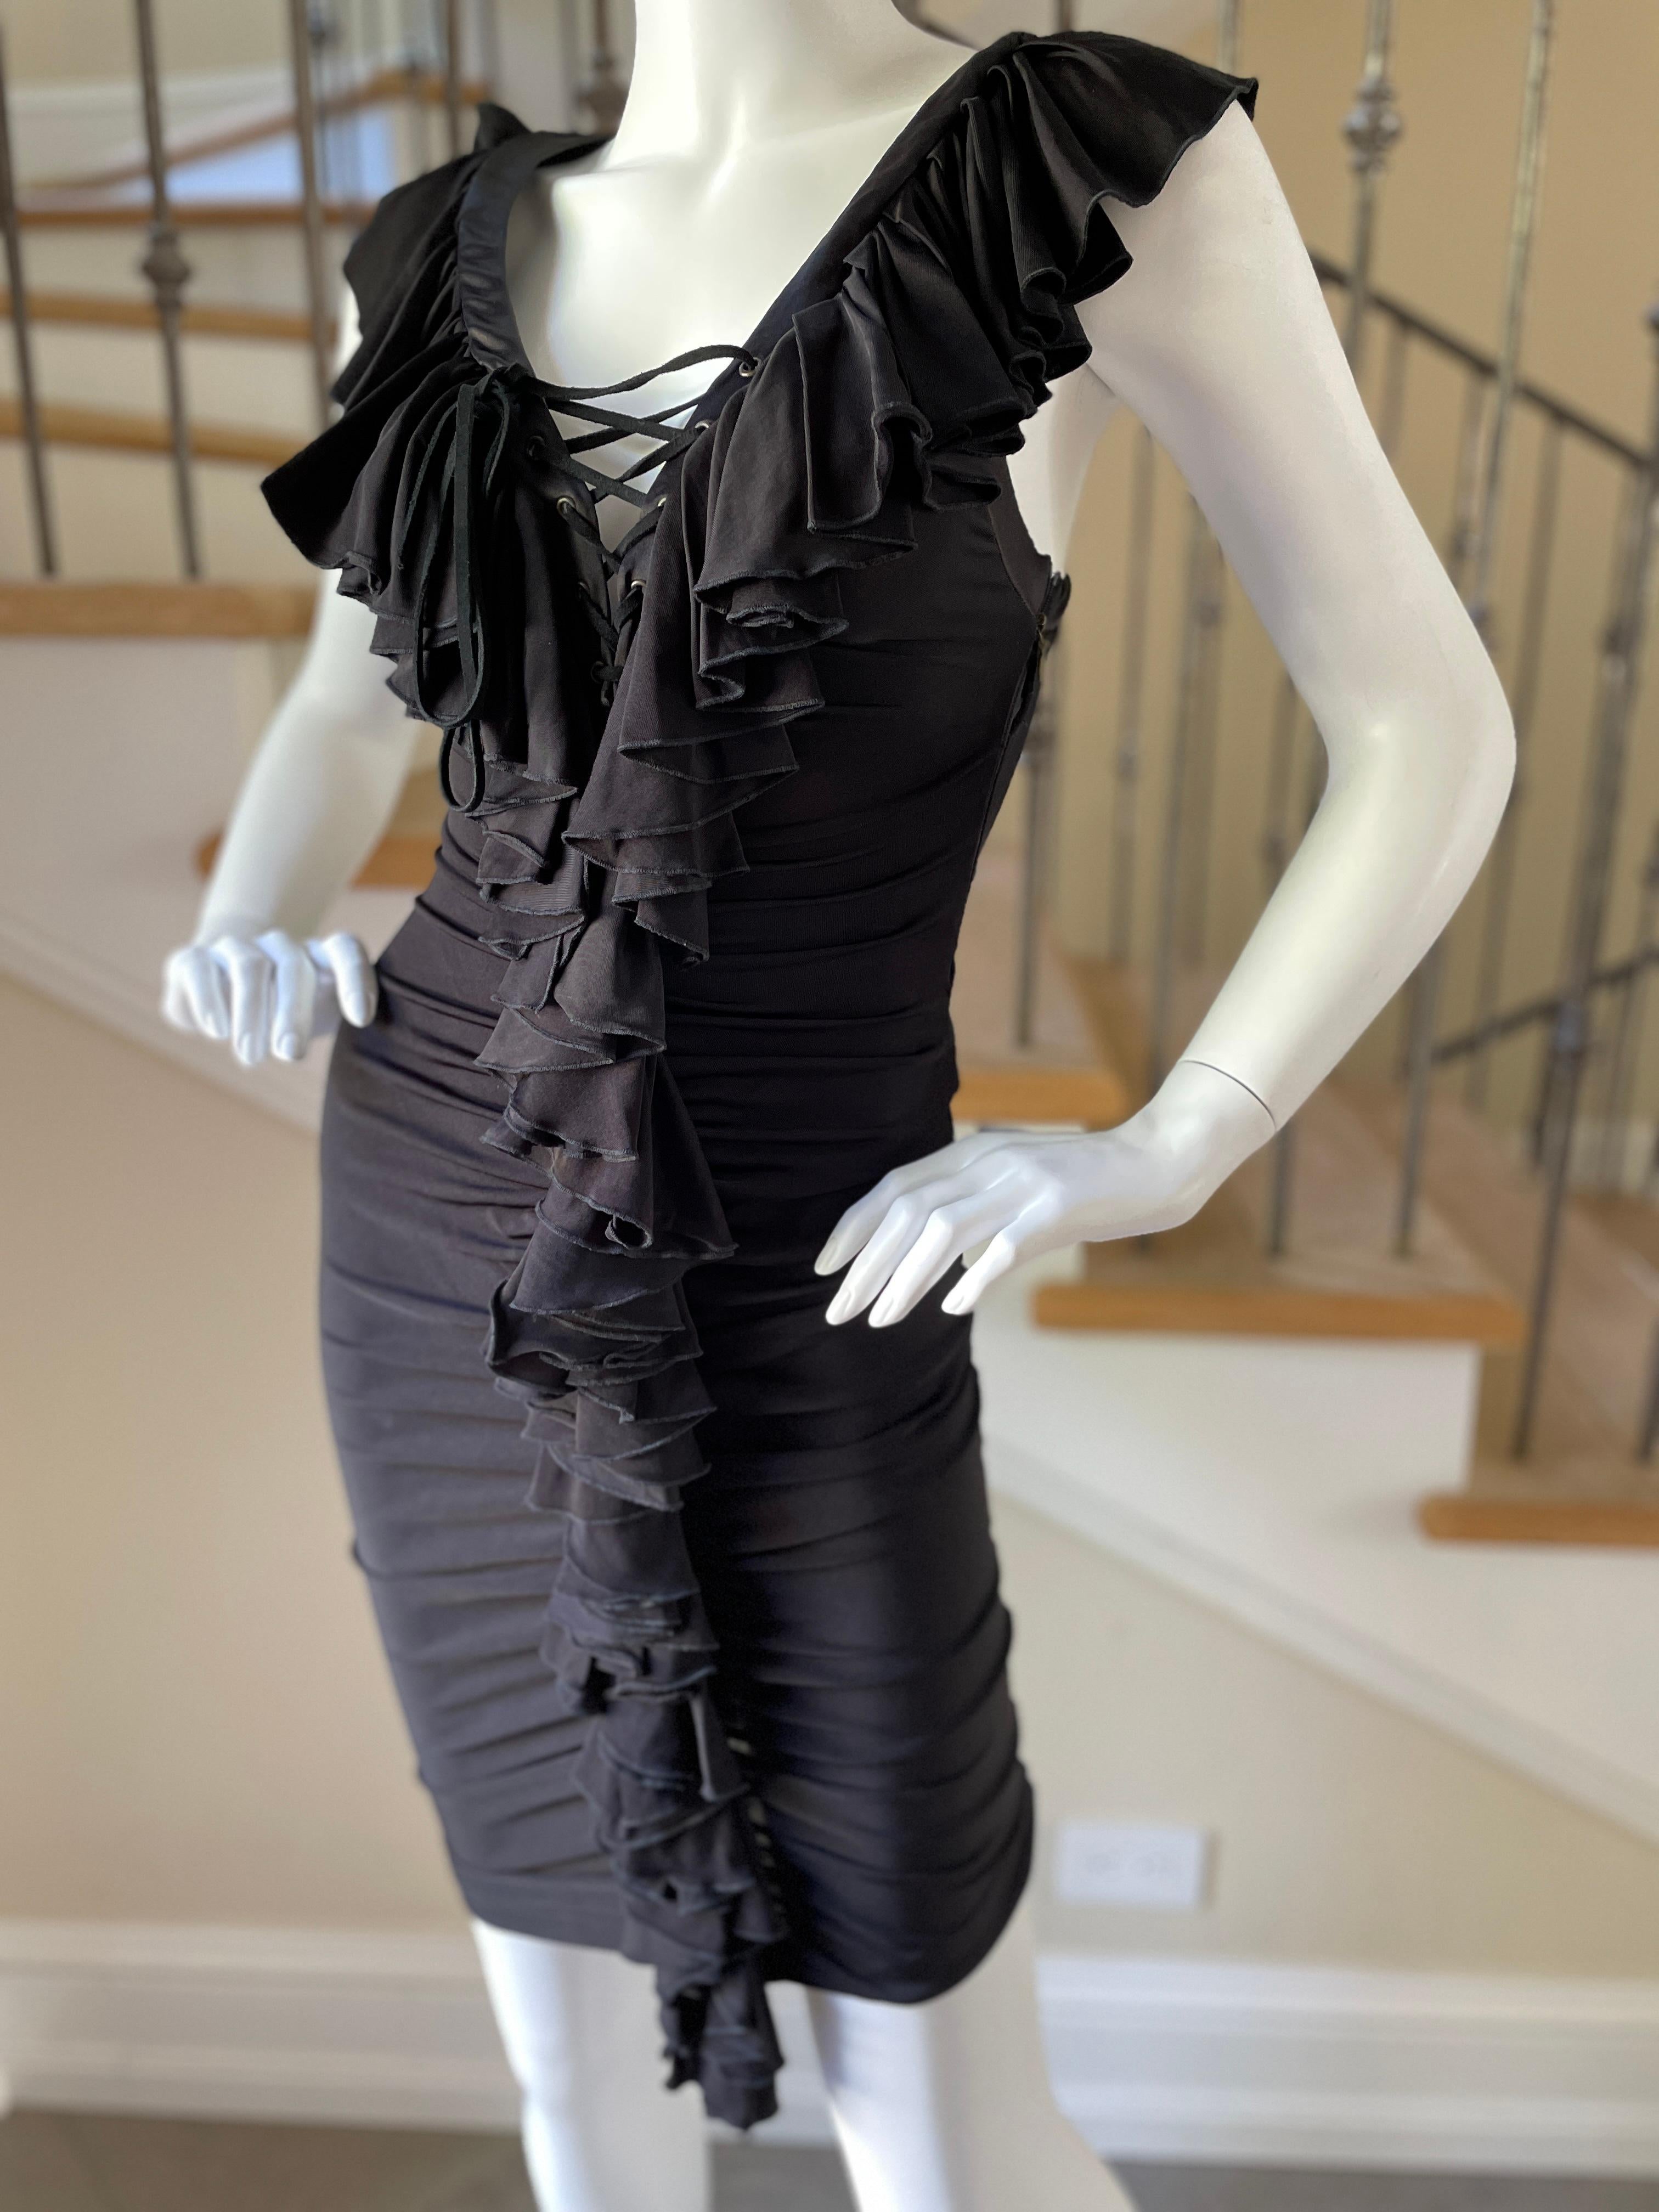 Just Cavalli Vintage Ruffled Corset Lace Cocktail Dress by Roberto Cavalli In Excellent Condition For Sale In Cloverdale, CA